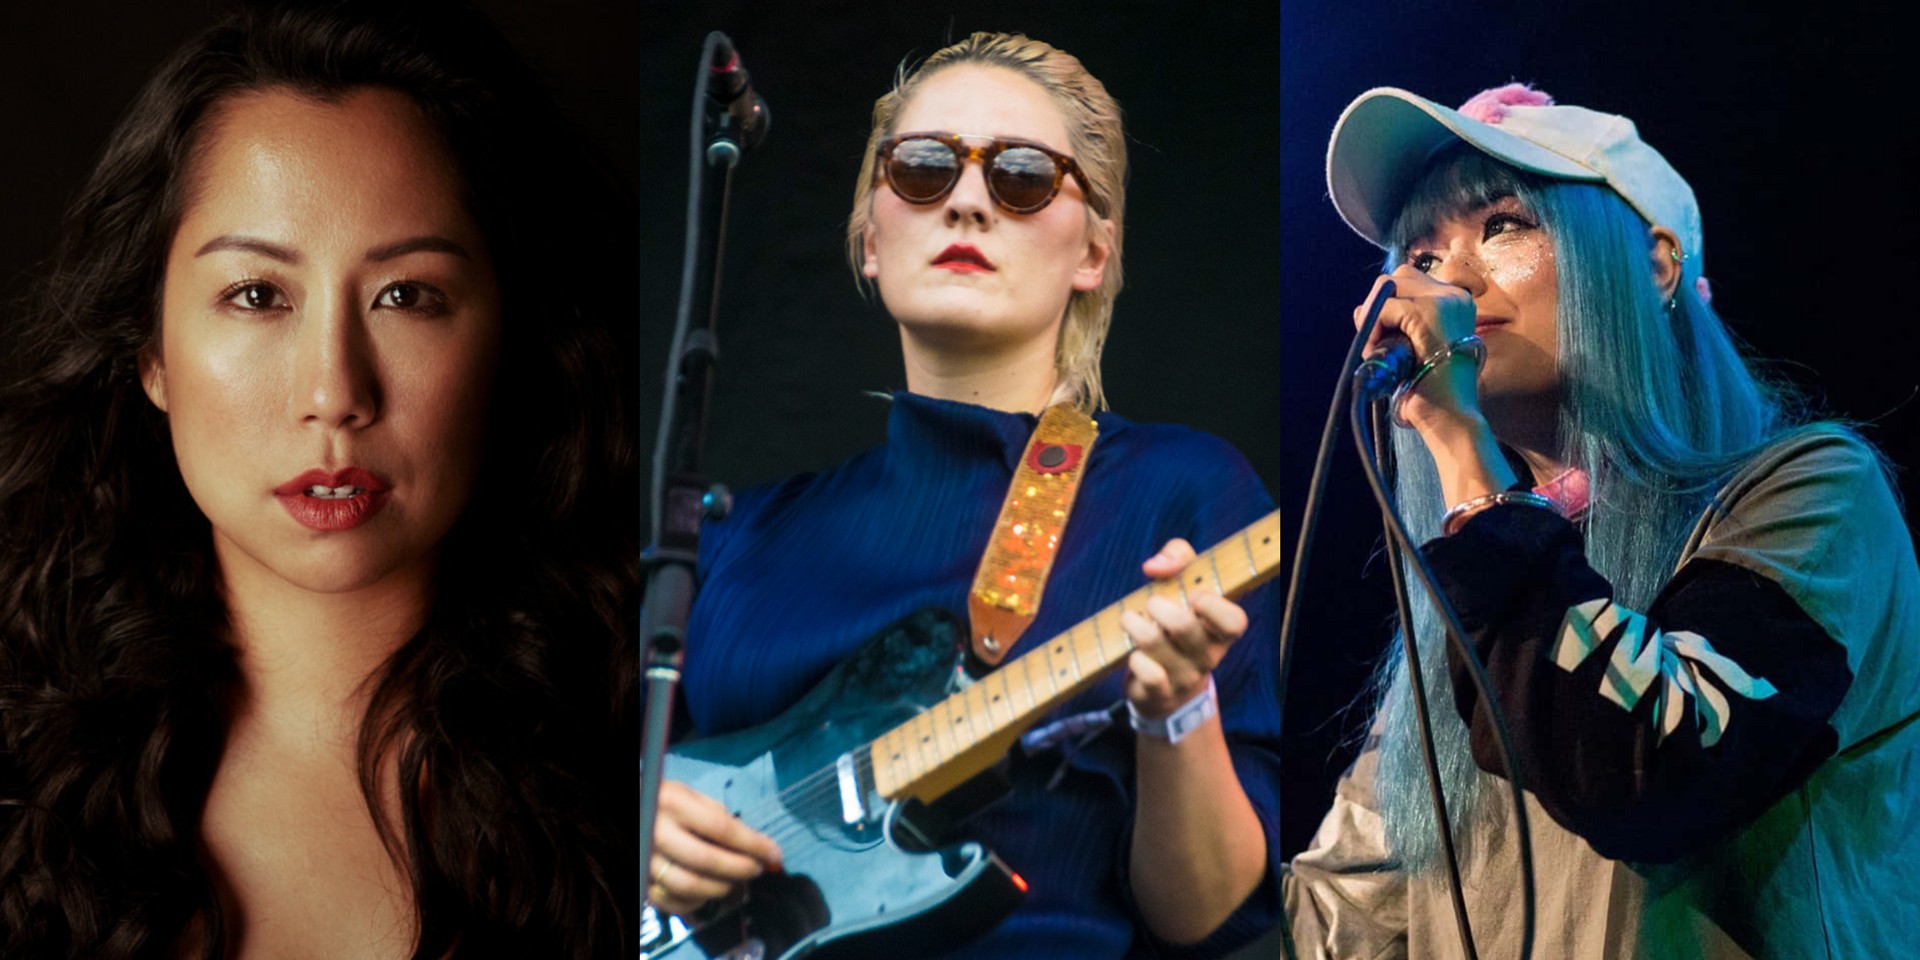 Female-fronted Alex Blake Charlie Sessions to debut in Singapore this December – Cate Le Bon, Kero Kero Bonito, Goat Girl, Vandetta and more to perform 